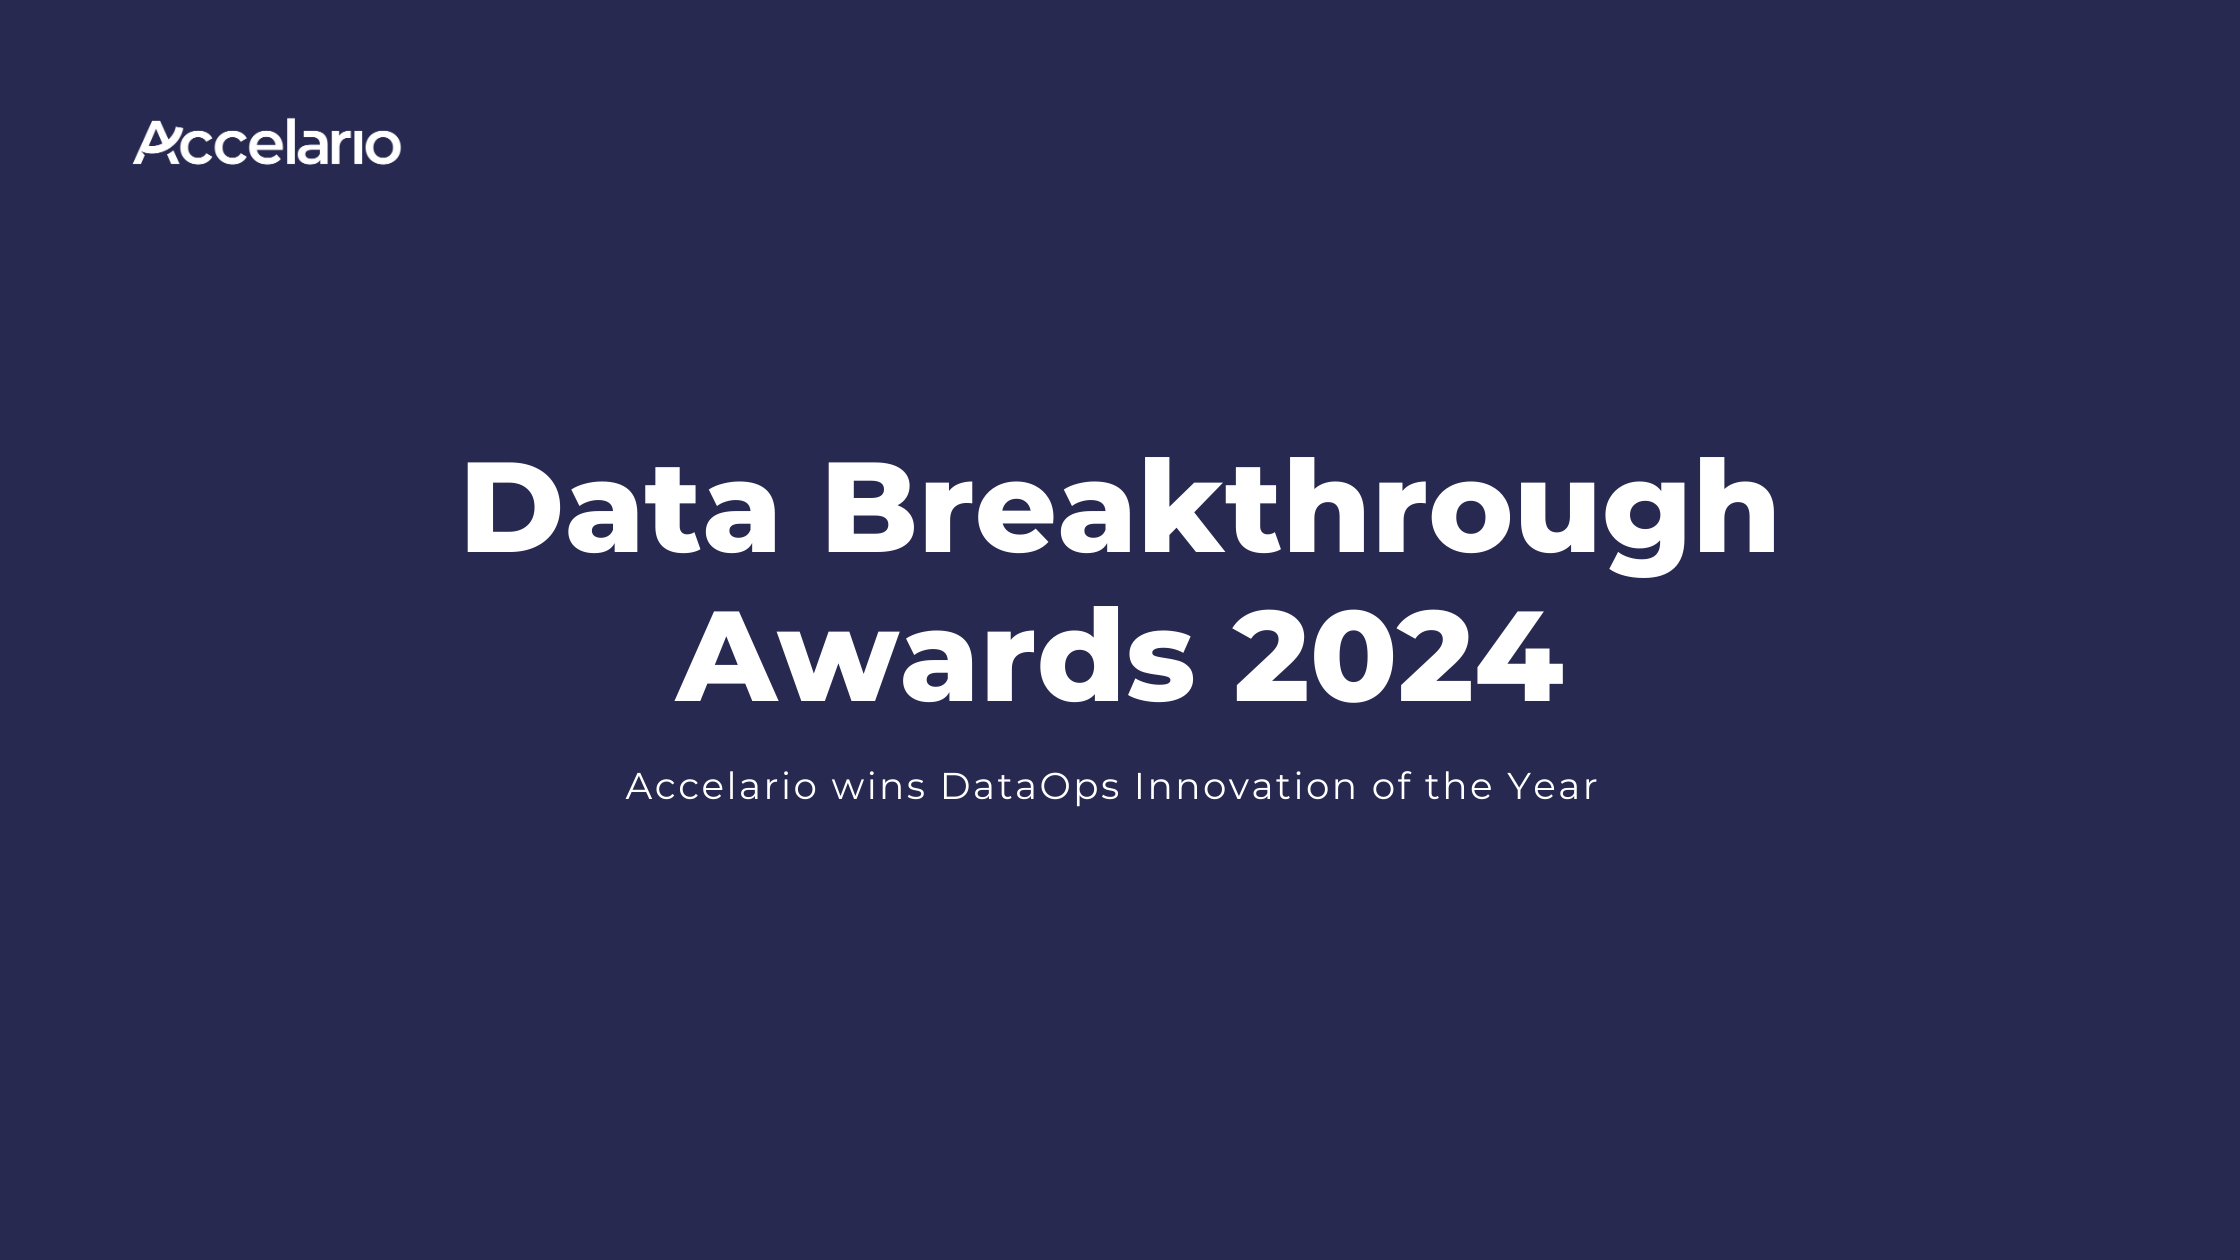 Accelario Wins “DataOps Innovation of the Year” in the 2024 Data Breakthrough Awards Program